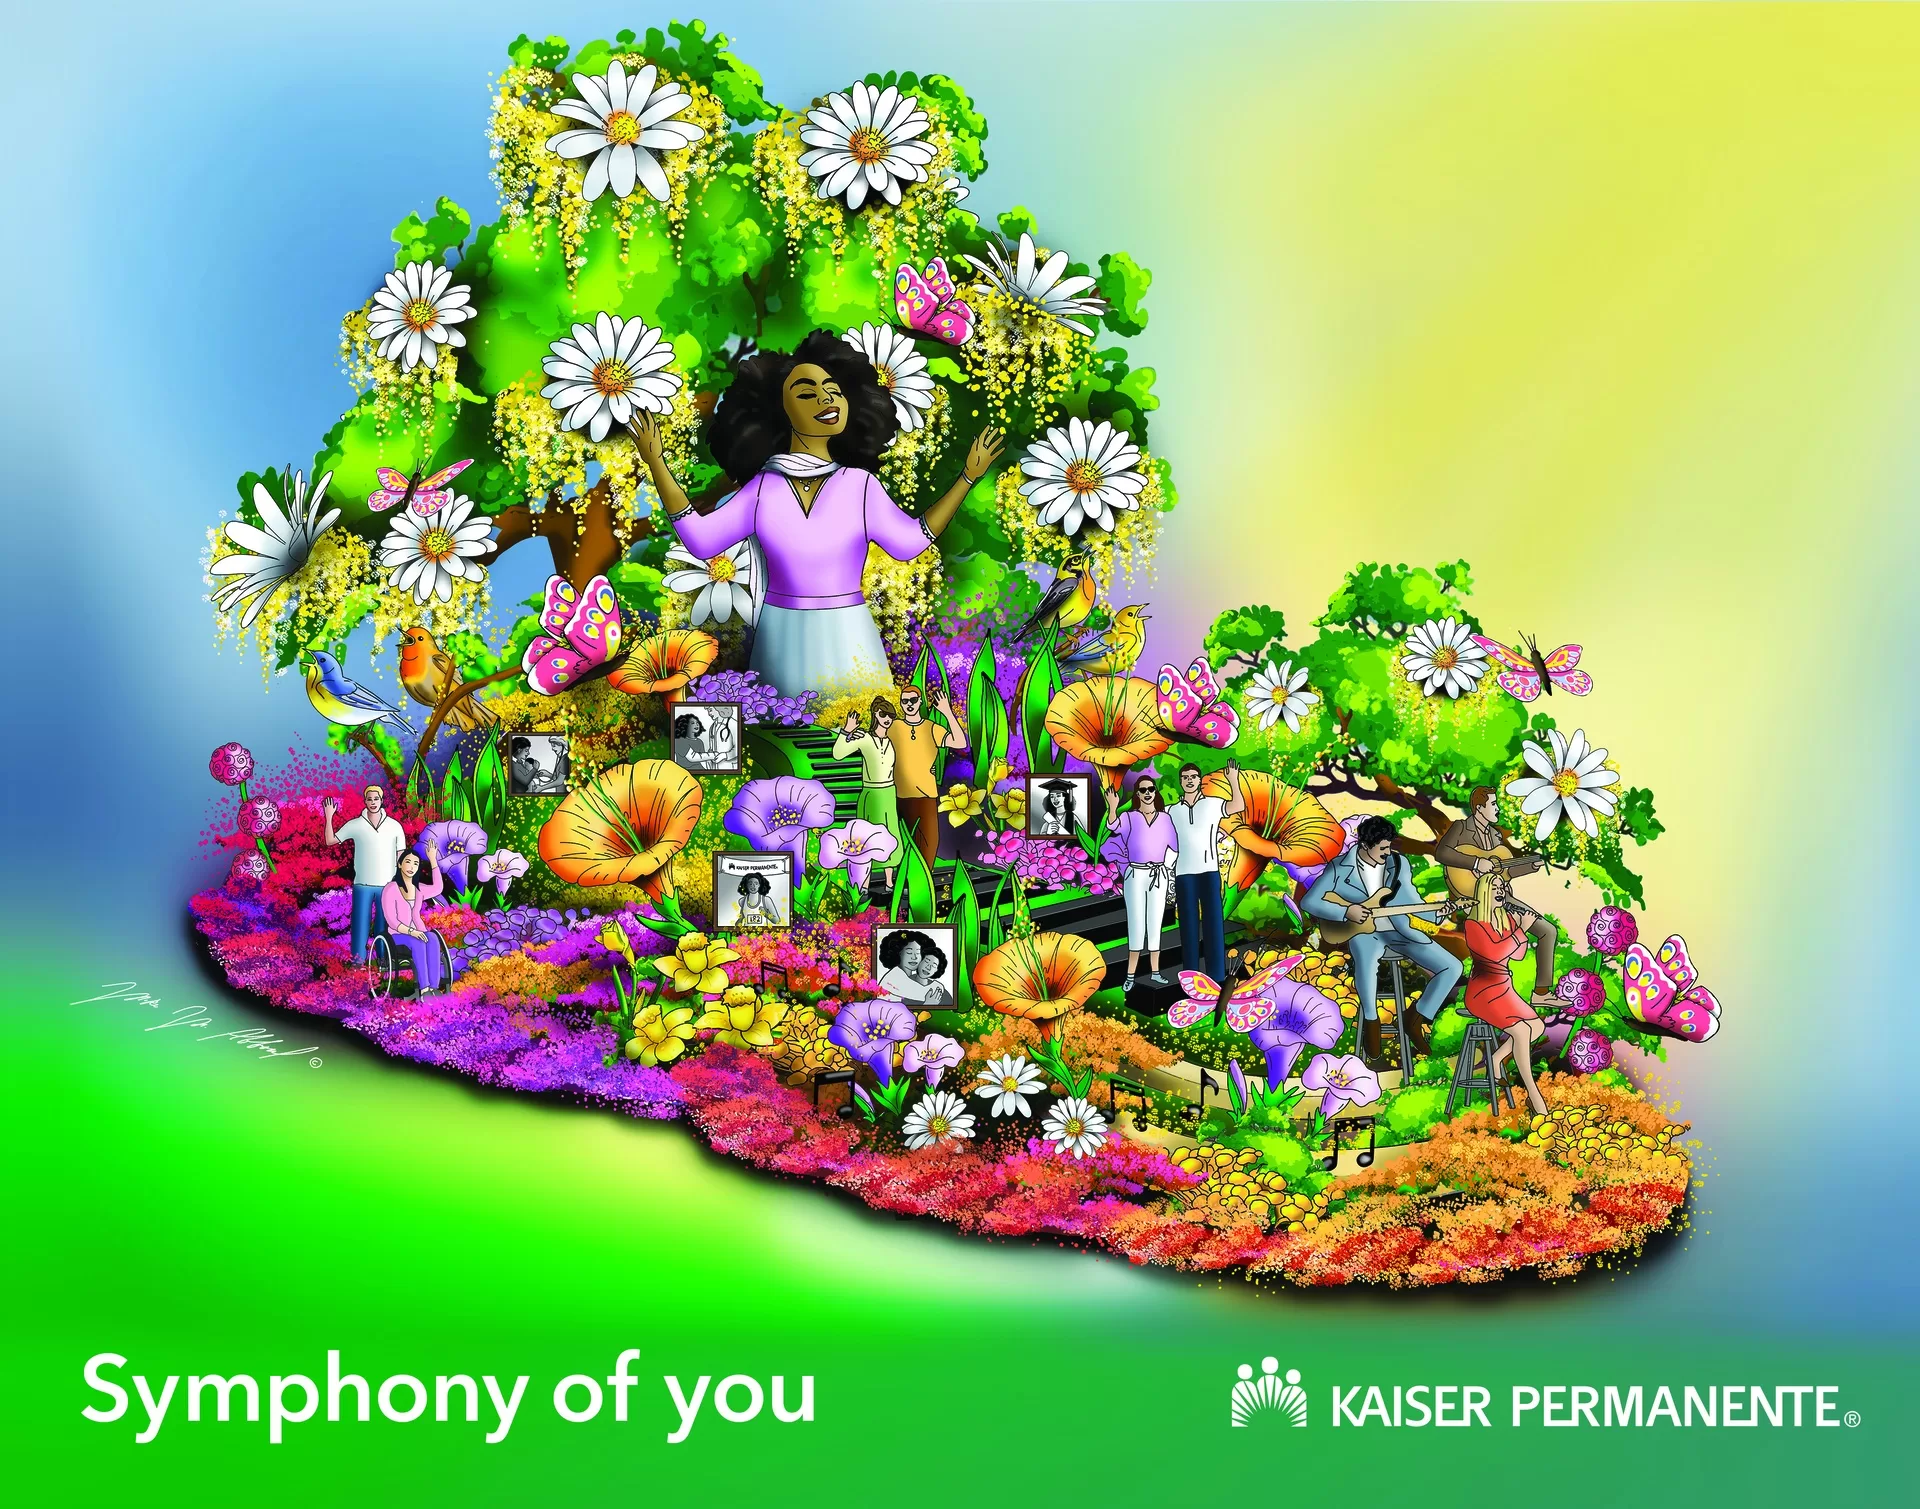 Illustration of diverse people enjoying music in vibrant floral setting with colorful background